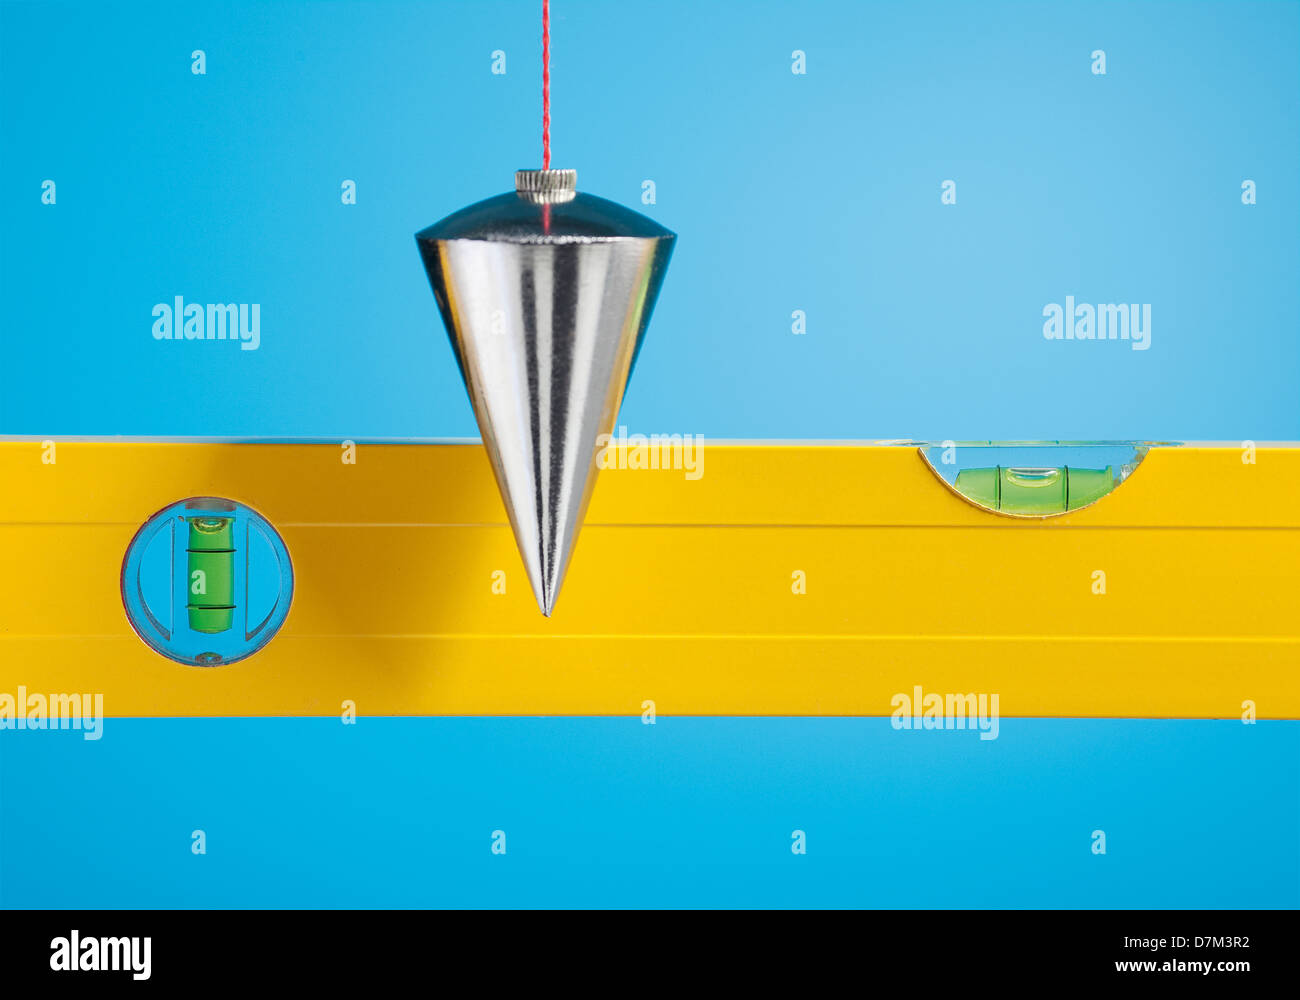 Plumb and water level Stock Photo